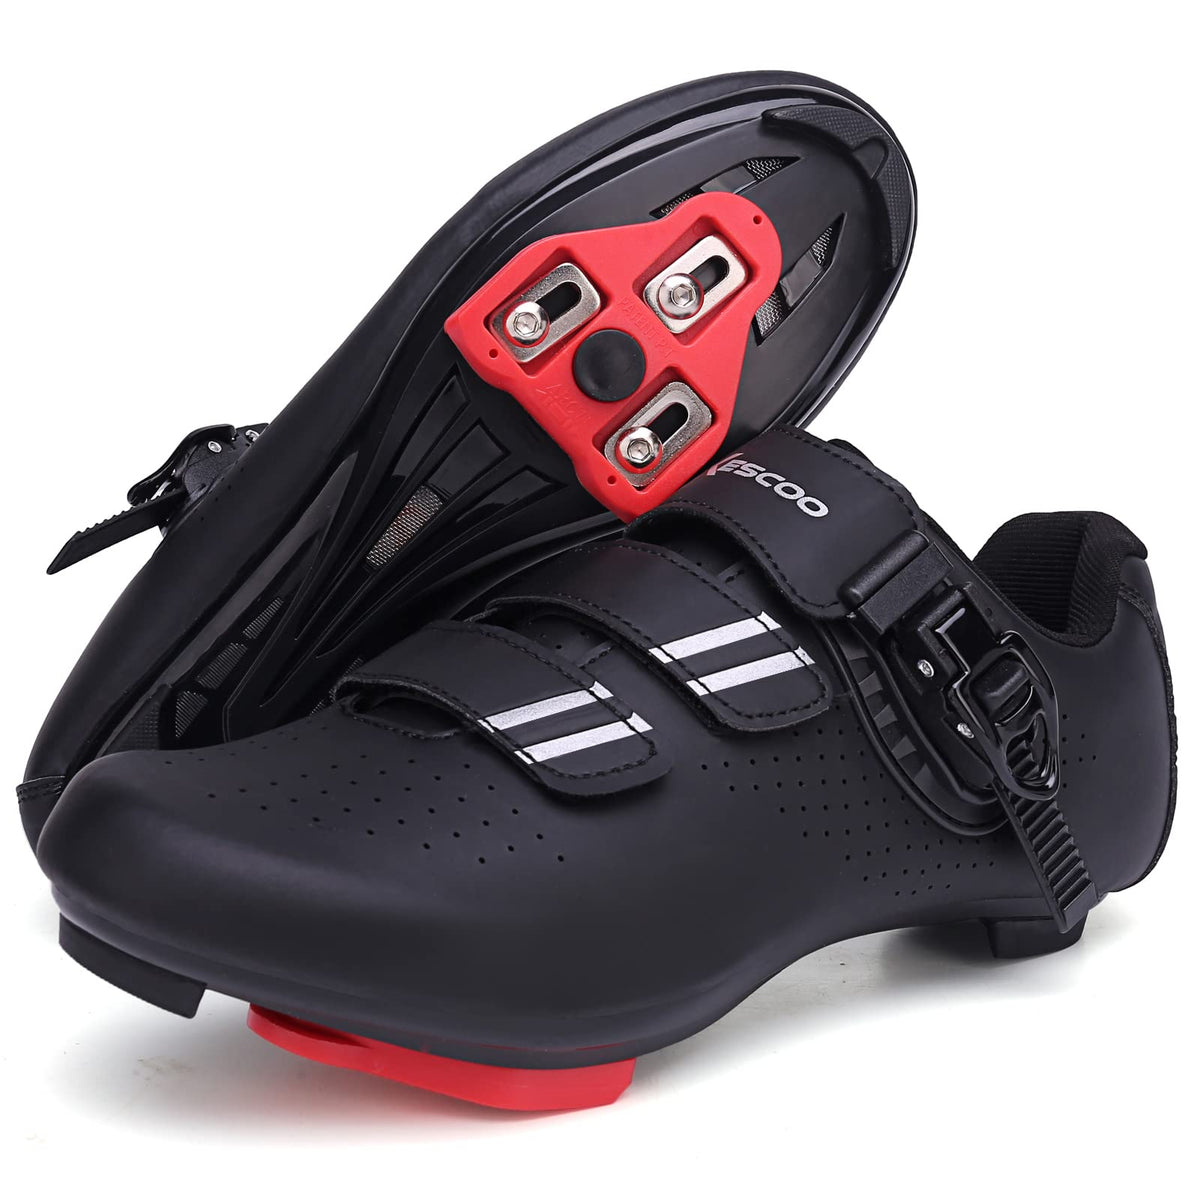 Cycling Shoes for Men Women Compatible with Peloton Bike Shimano SPD & Look ARC Delta for Indoor Spin Cycle Road Bike Shoes with Delta Cleats Pre-Installed, Black 11.5